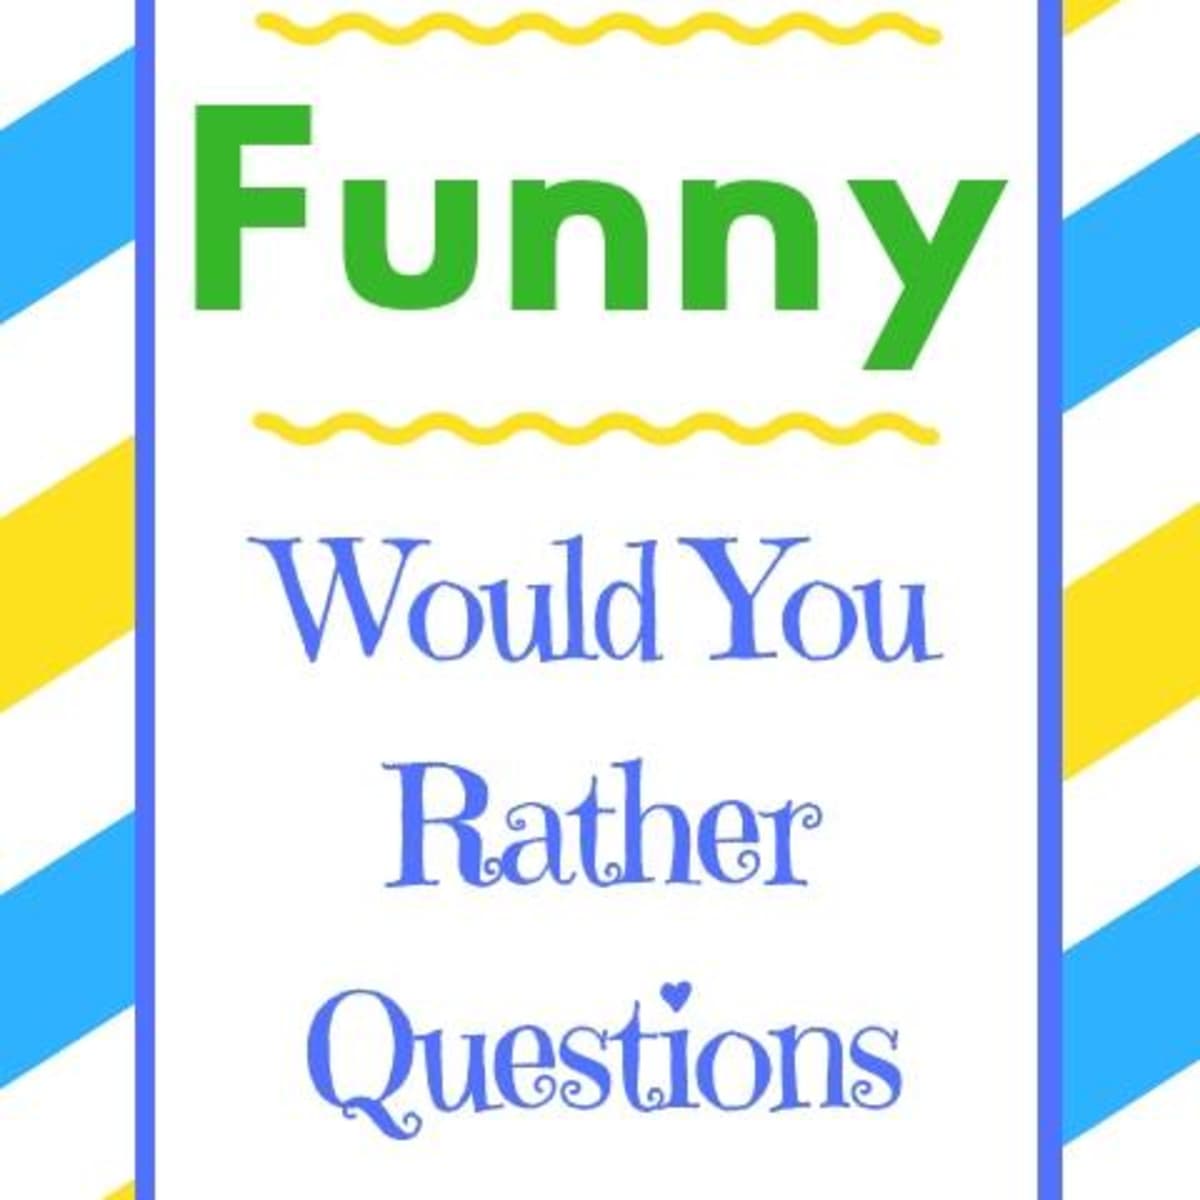 60+ Funny Would You Rather Questions - HobbyLark